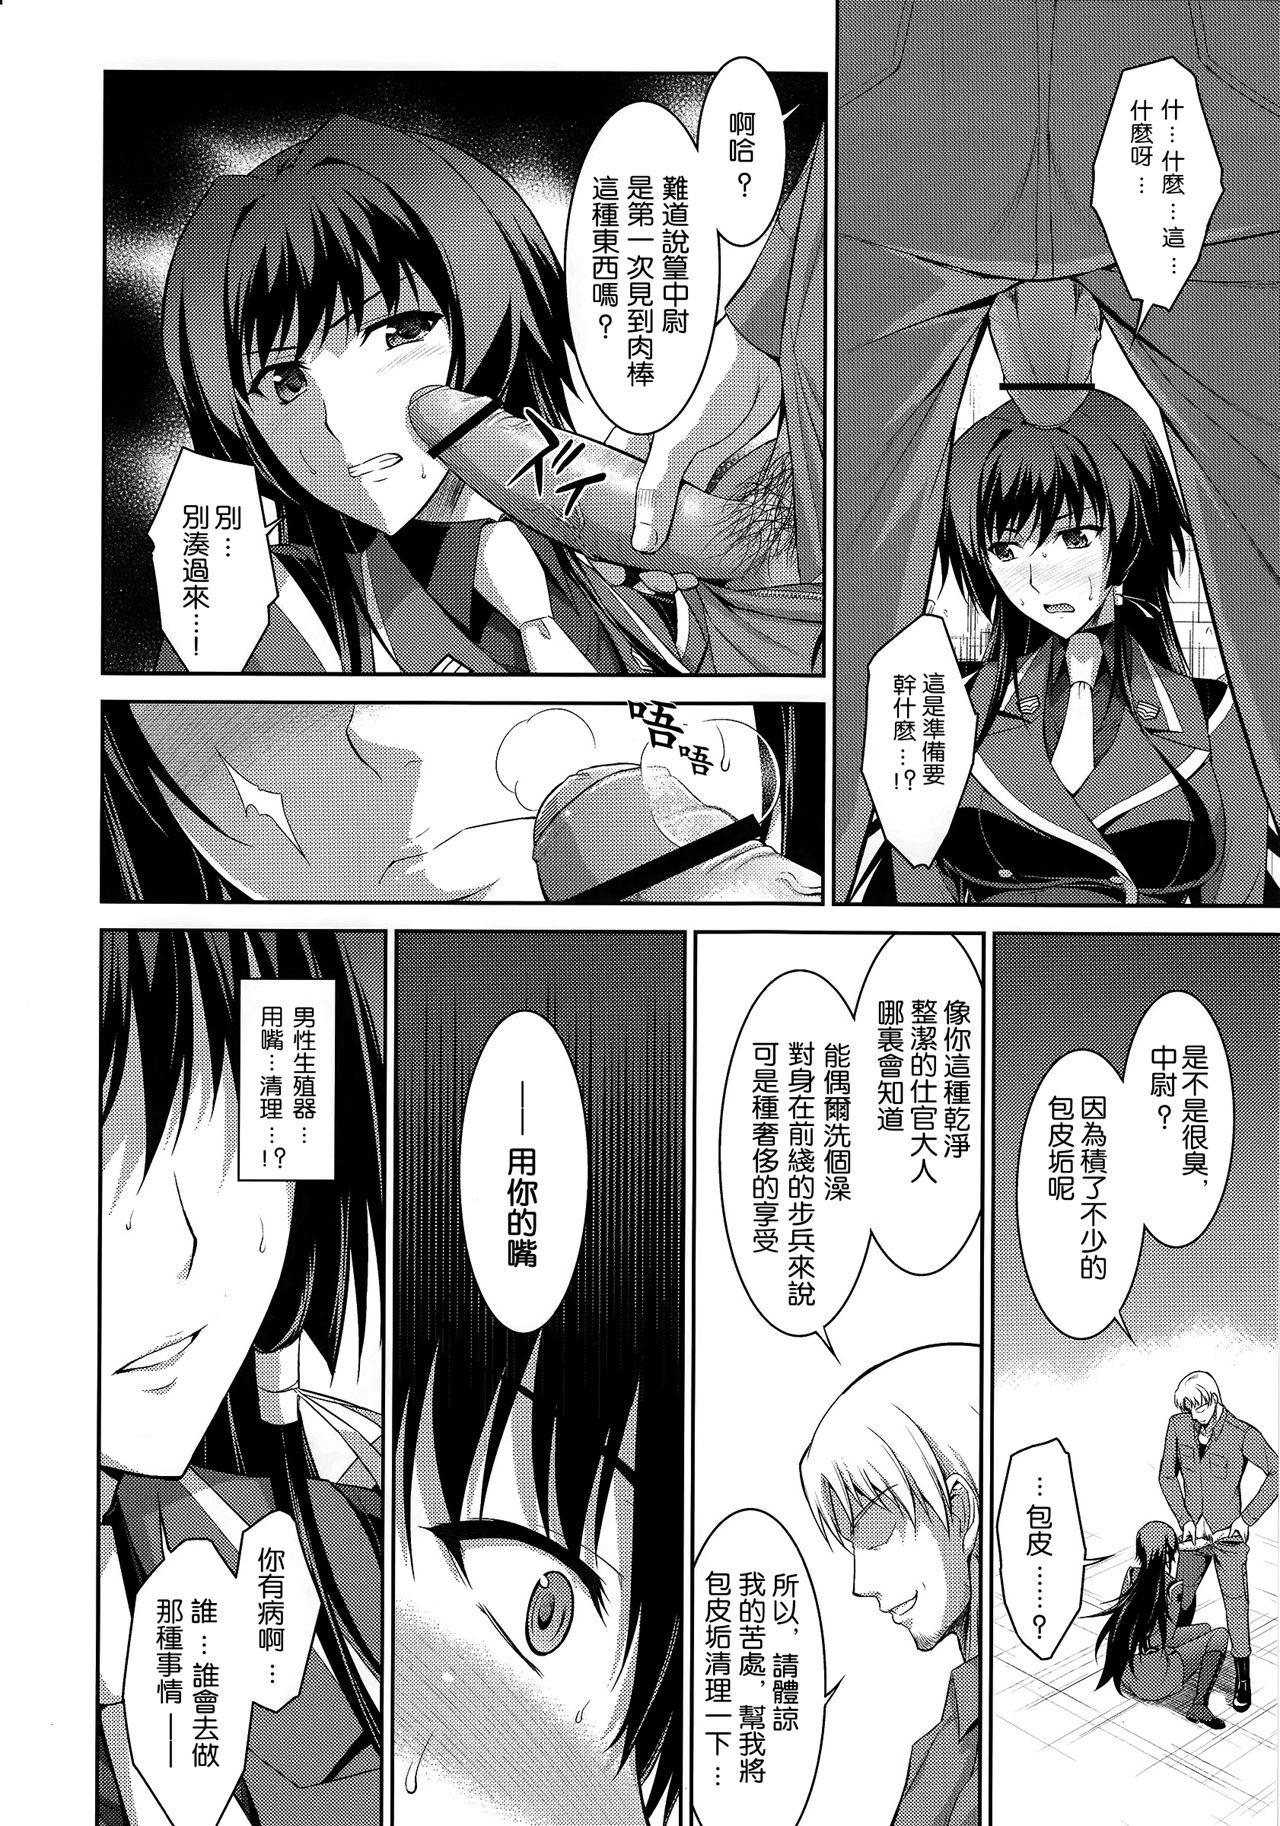 Milf Sex Ouka Chiru! - Muv-luv alternative total eclipse Webcamchat - Page 8